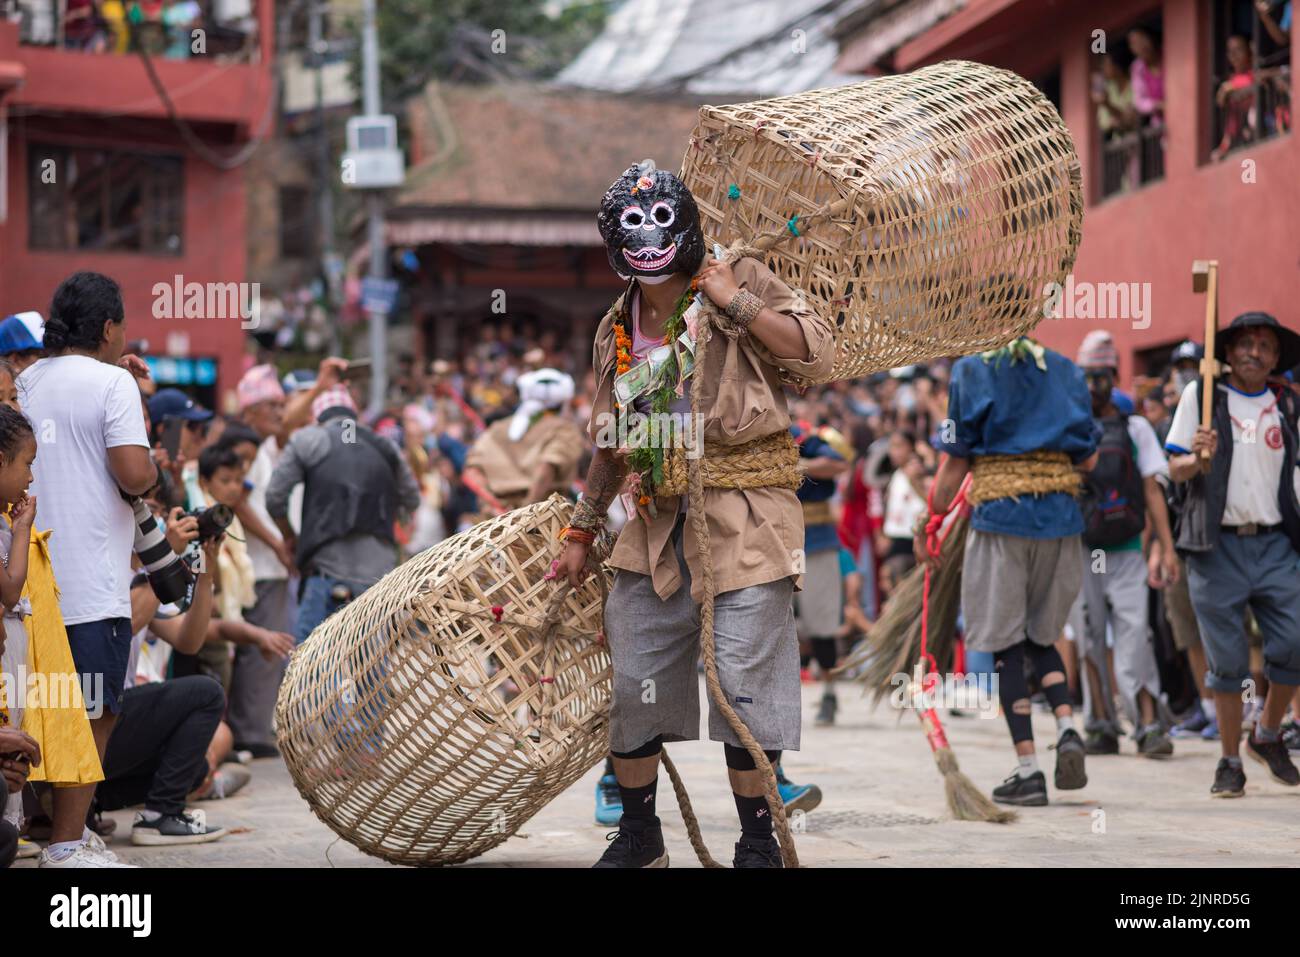 A man dressed in a traditional costume performs a holy dance during the festival. People celebrate Gai Jatra or cow festival in memory of the departed souls in the past year for salvation and peace. It is believed that cows guide the departed souls to cross the river to get to heaven. Stock Photo